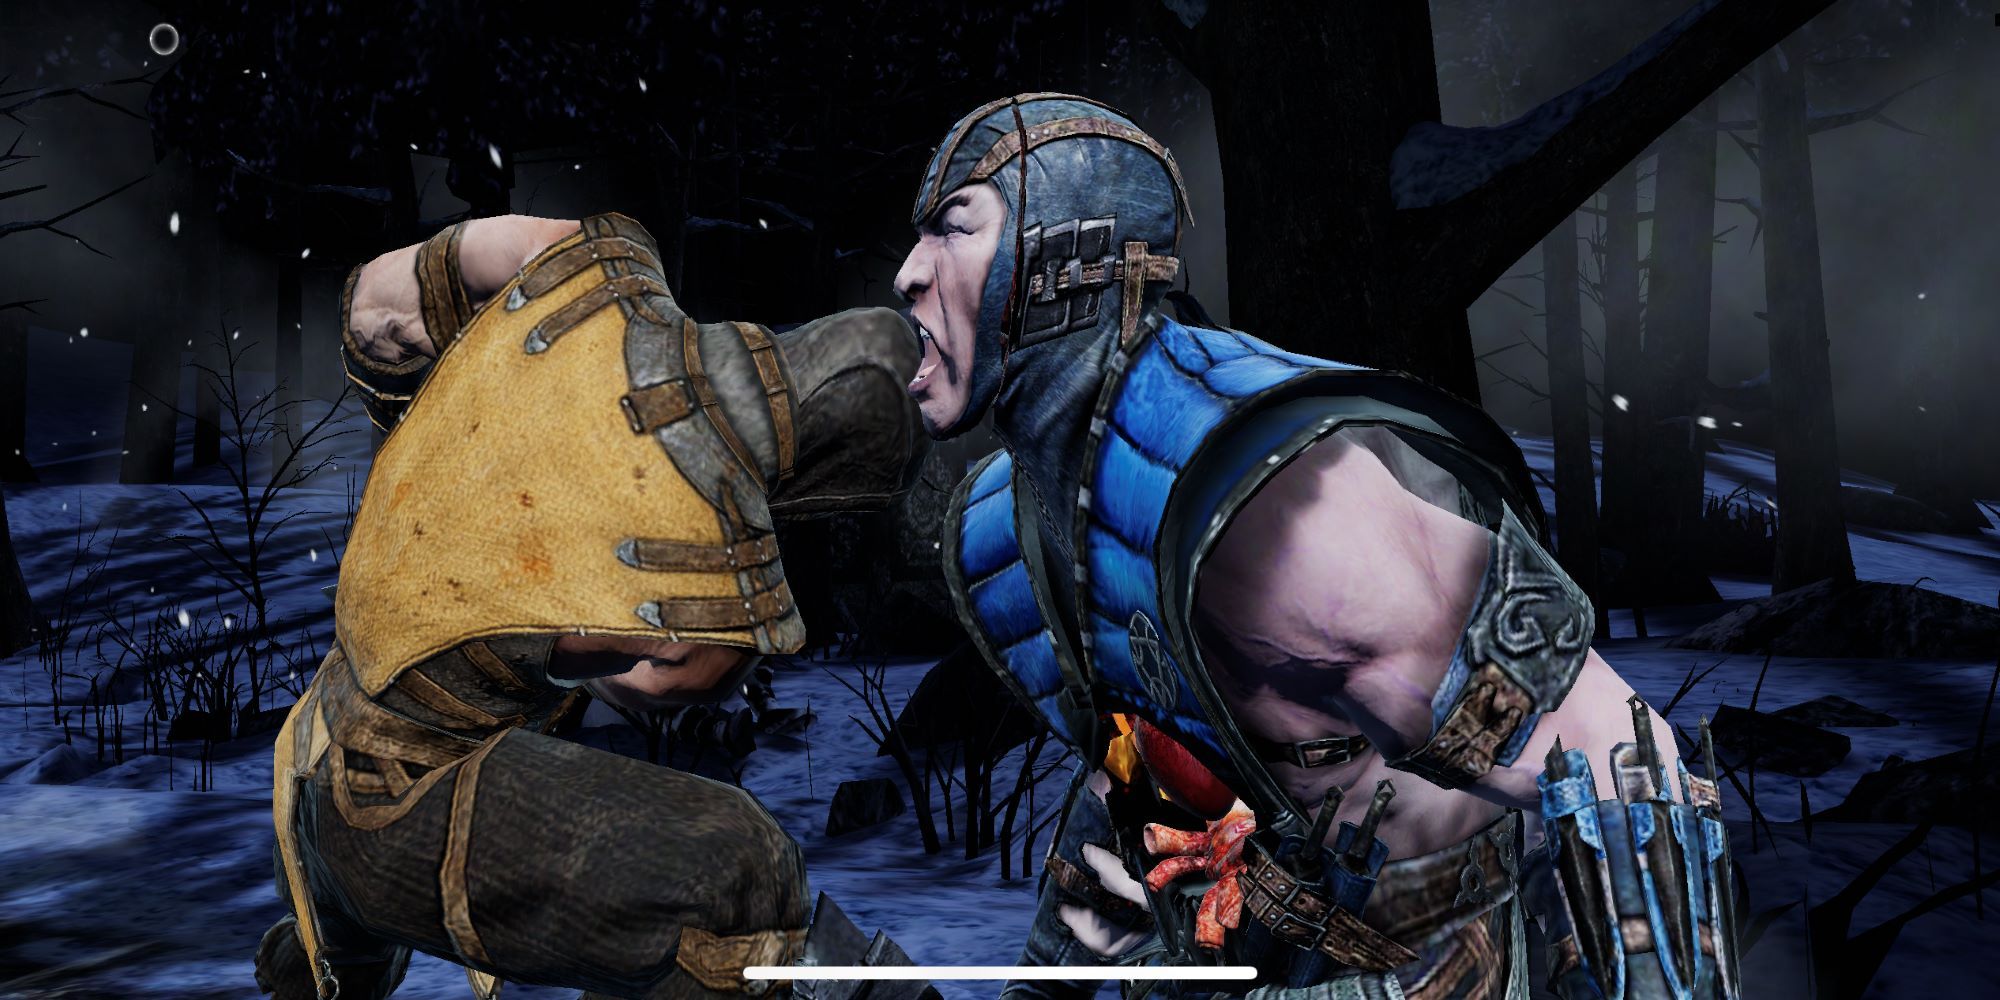 Scorpion rips a hole through Sub-Zero's chest during a battle inside a dark forest in Mortal Kombat Mobile.